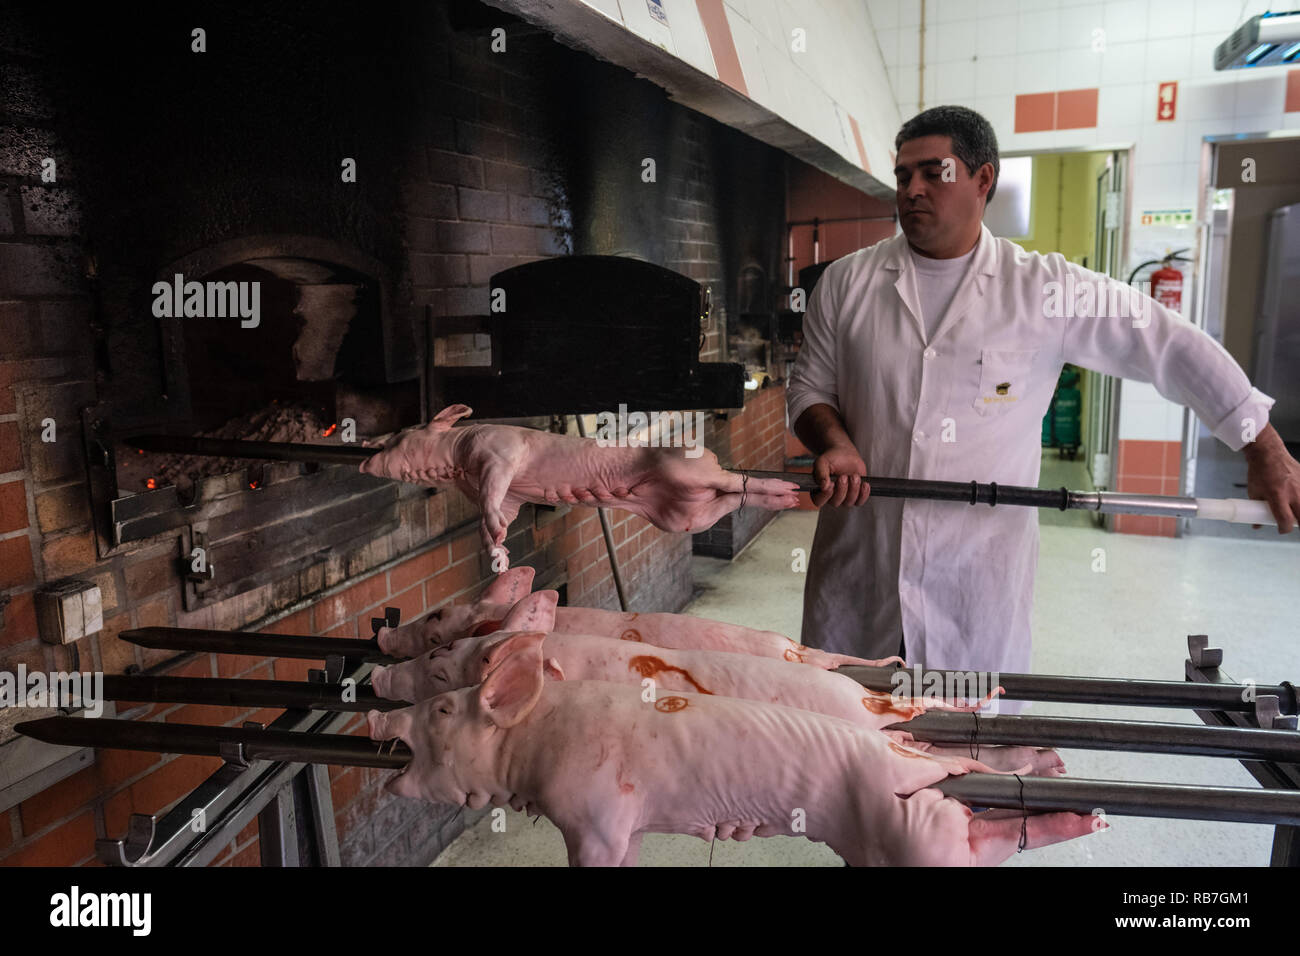 Man inserting a piglet into the oven for roasting in traditional portuguese Bairrada region's way, Mealhada, Portugal Stock Photo